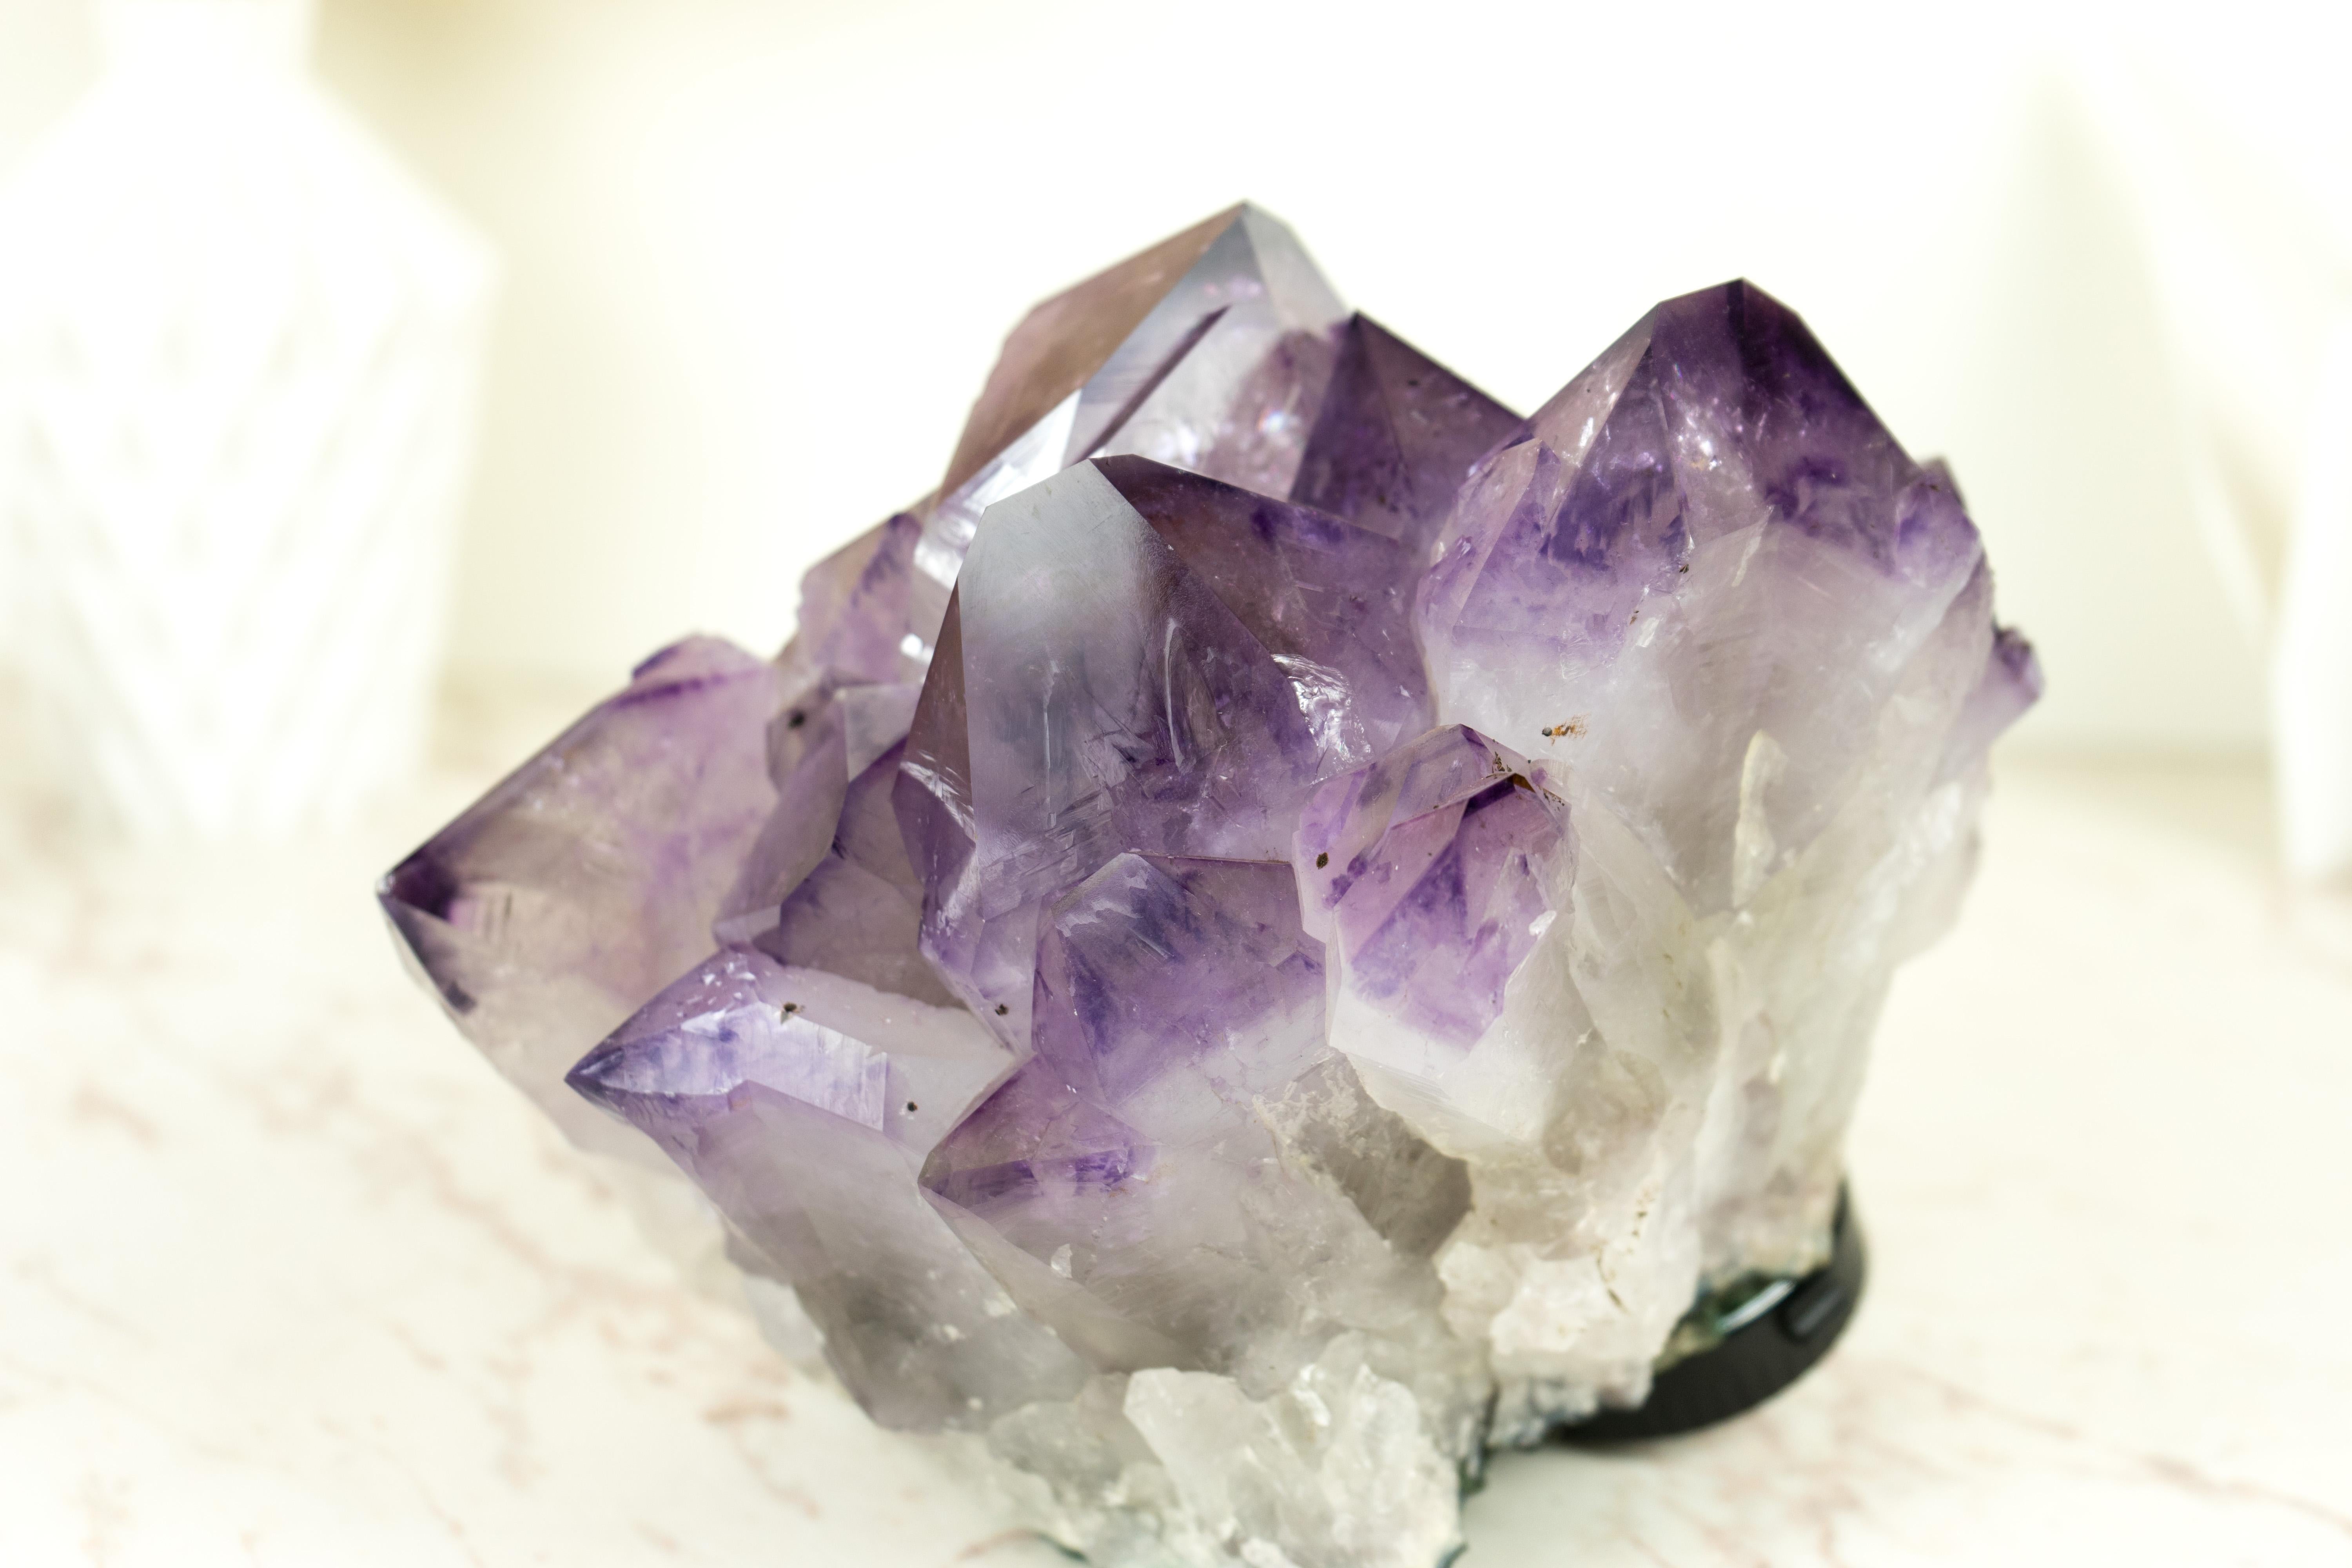 With world-class characteristics, this extraordinary Amethyst Cluster from Brazil brings Phantom Crystal Amethyst lines, X-Large sized points, as well as the perfectly intact quality of the druzy, making it a standout centerpiece for any collection